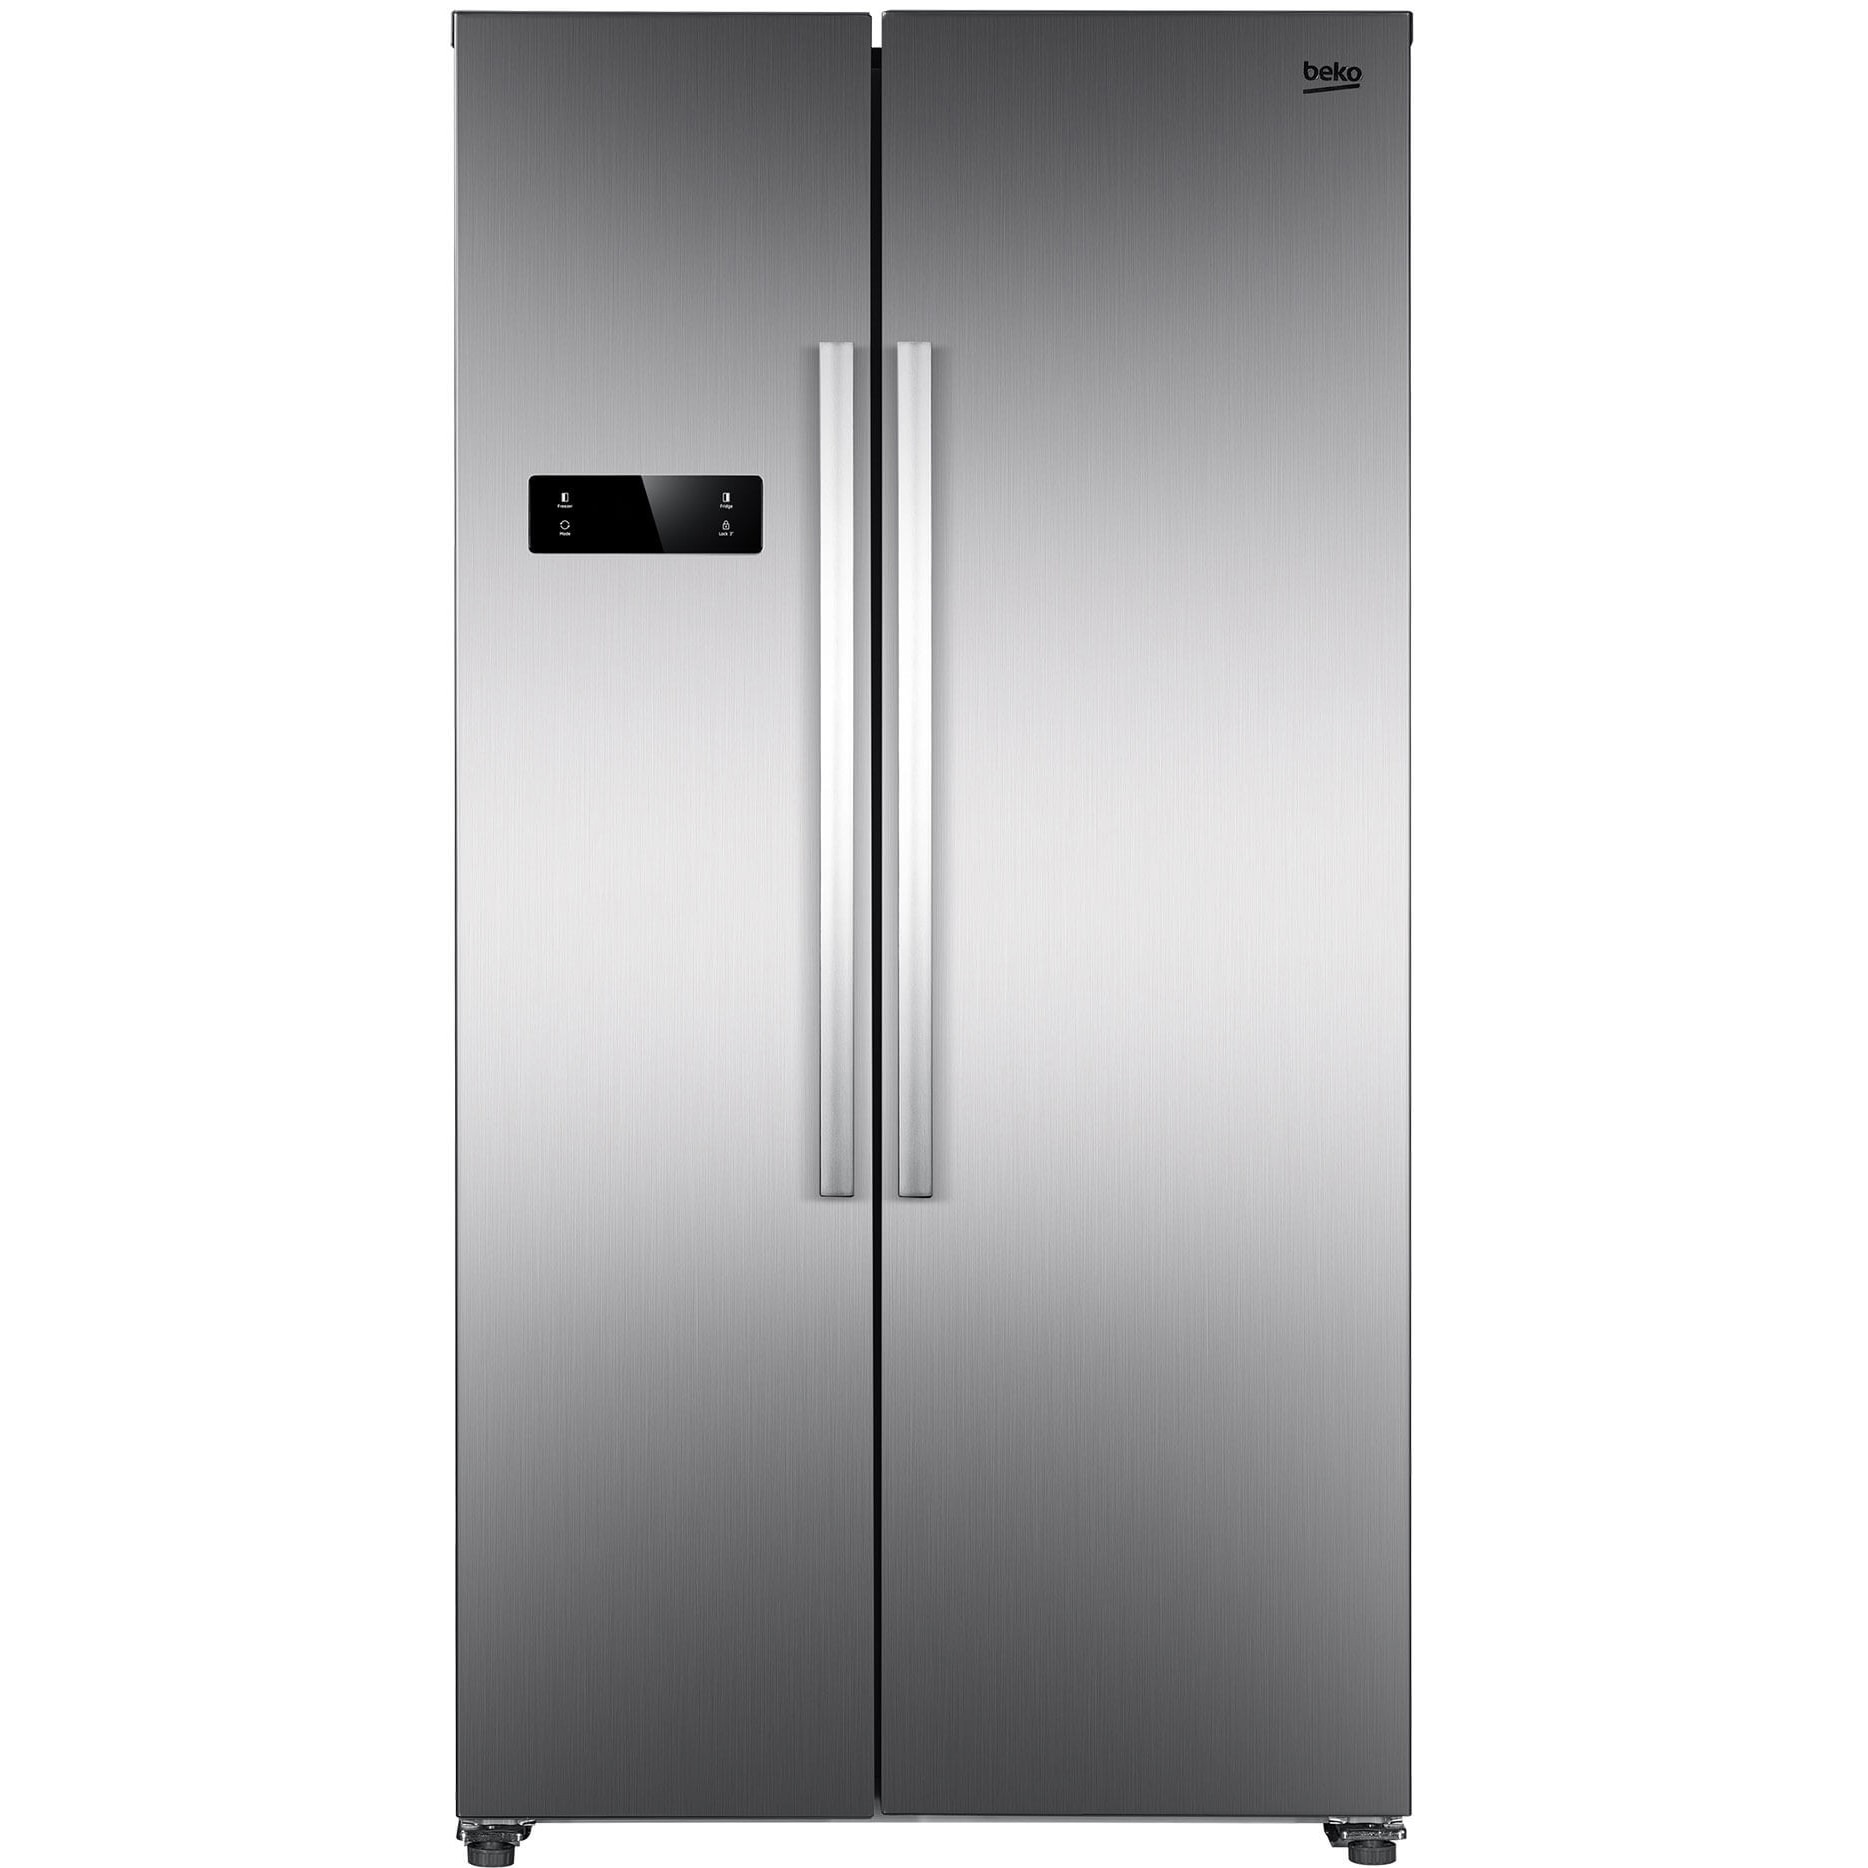 Frigider Side by side Beko GNO4331XPN, 442 l, NeoFrost Dual Cooling, Display touch, Clasa E, H 177 cm, Inox